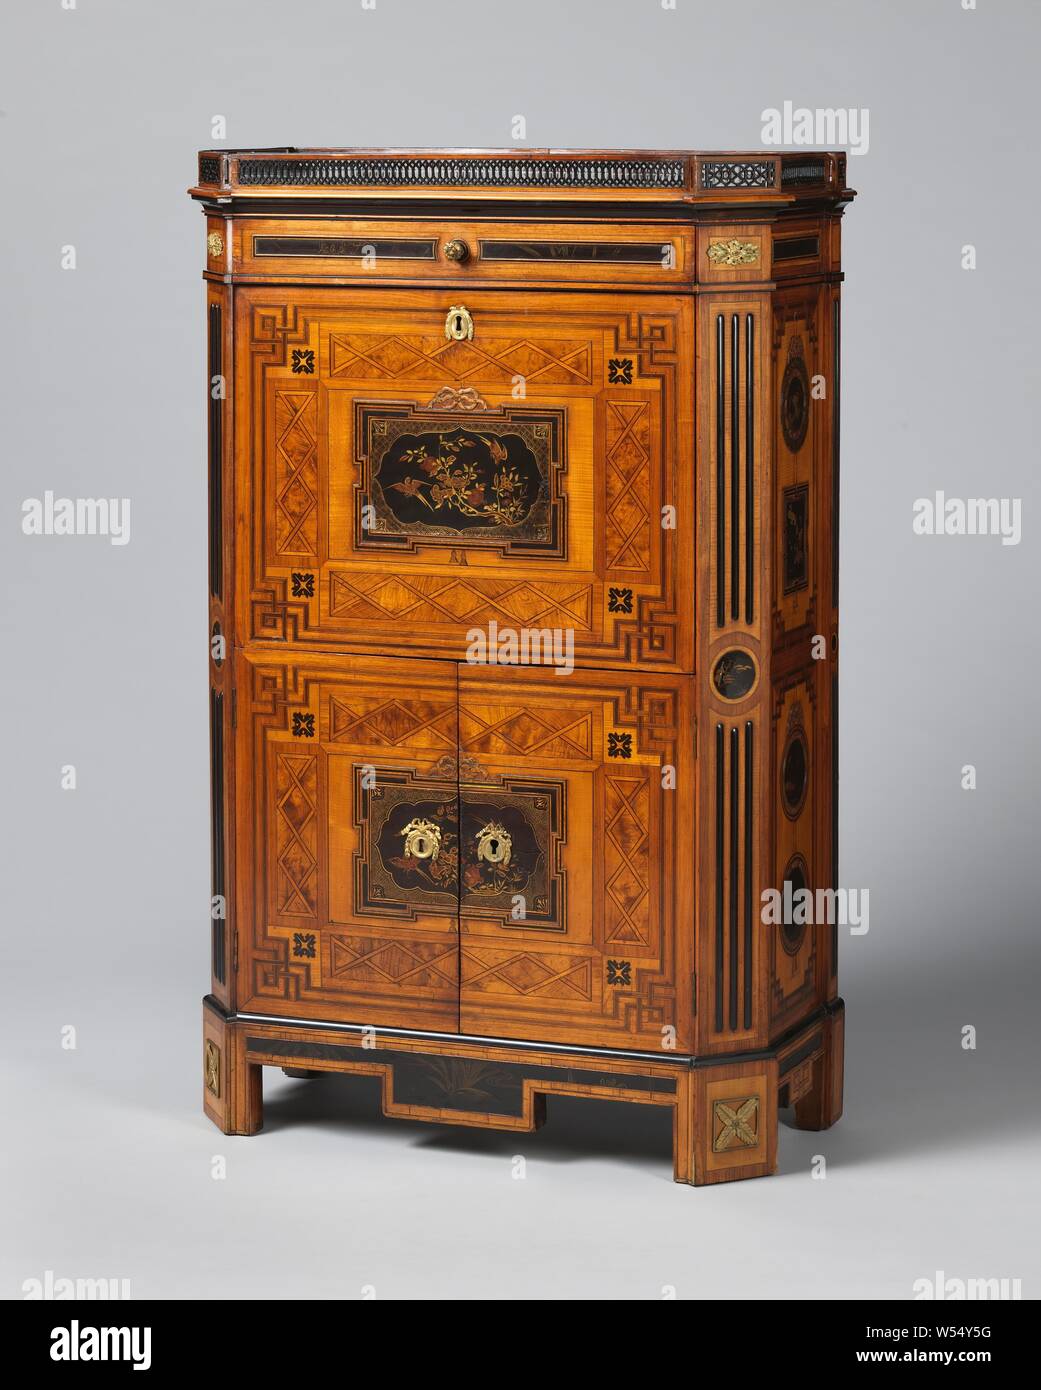 Secretaire With Marquetry And Lacquer Panels Secretaire With